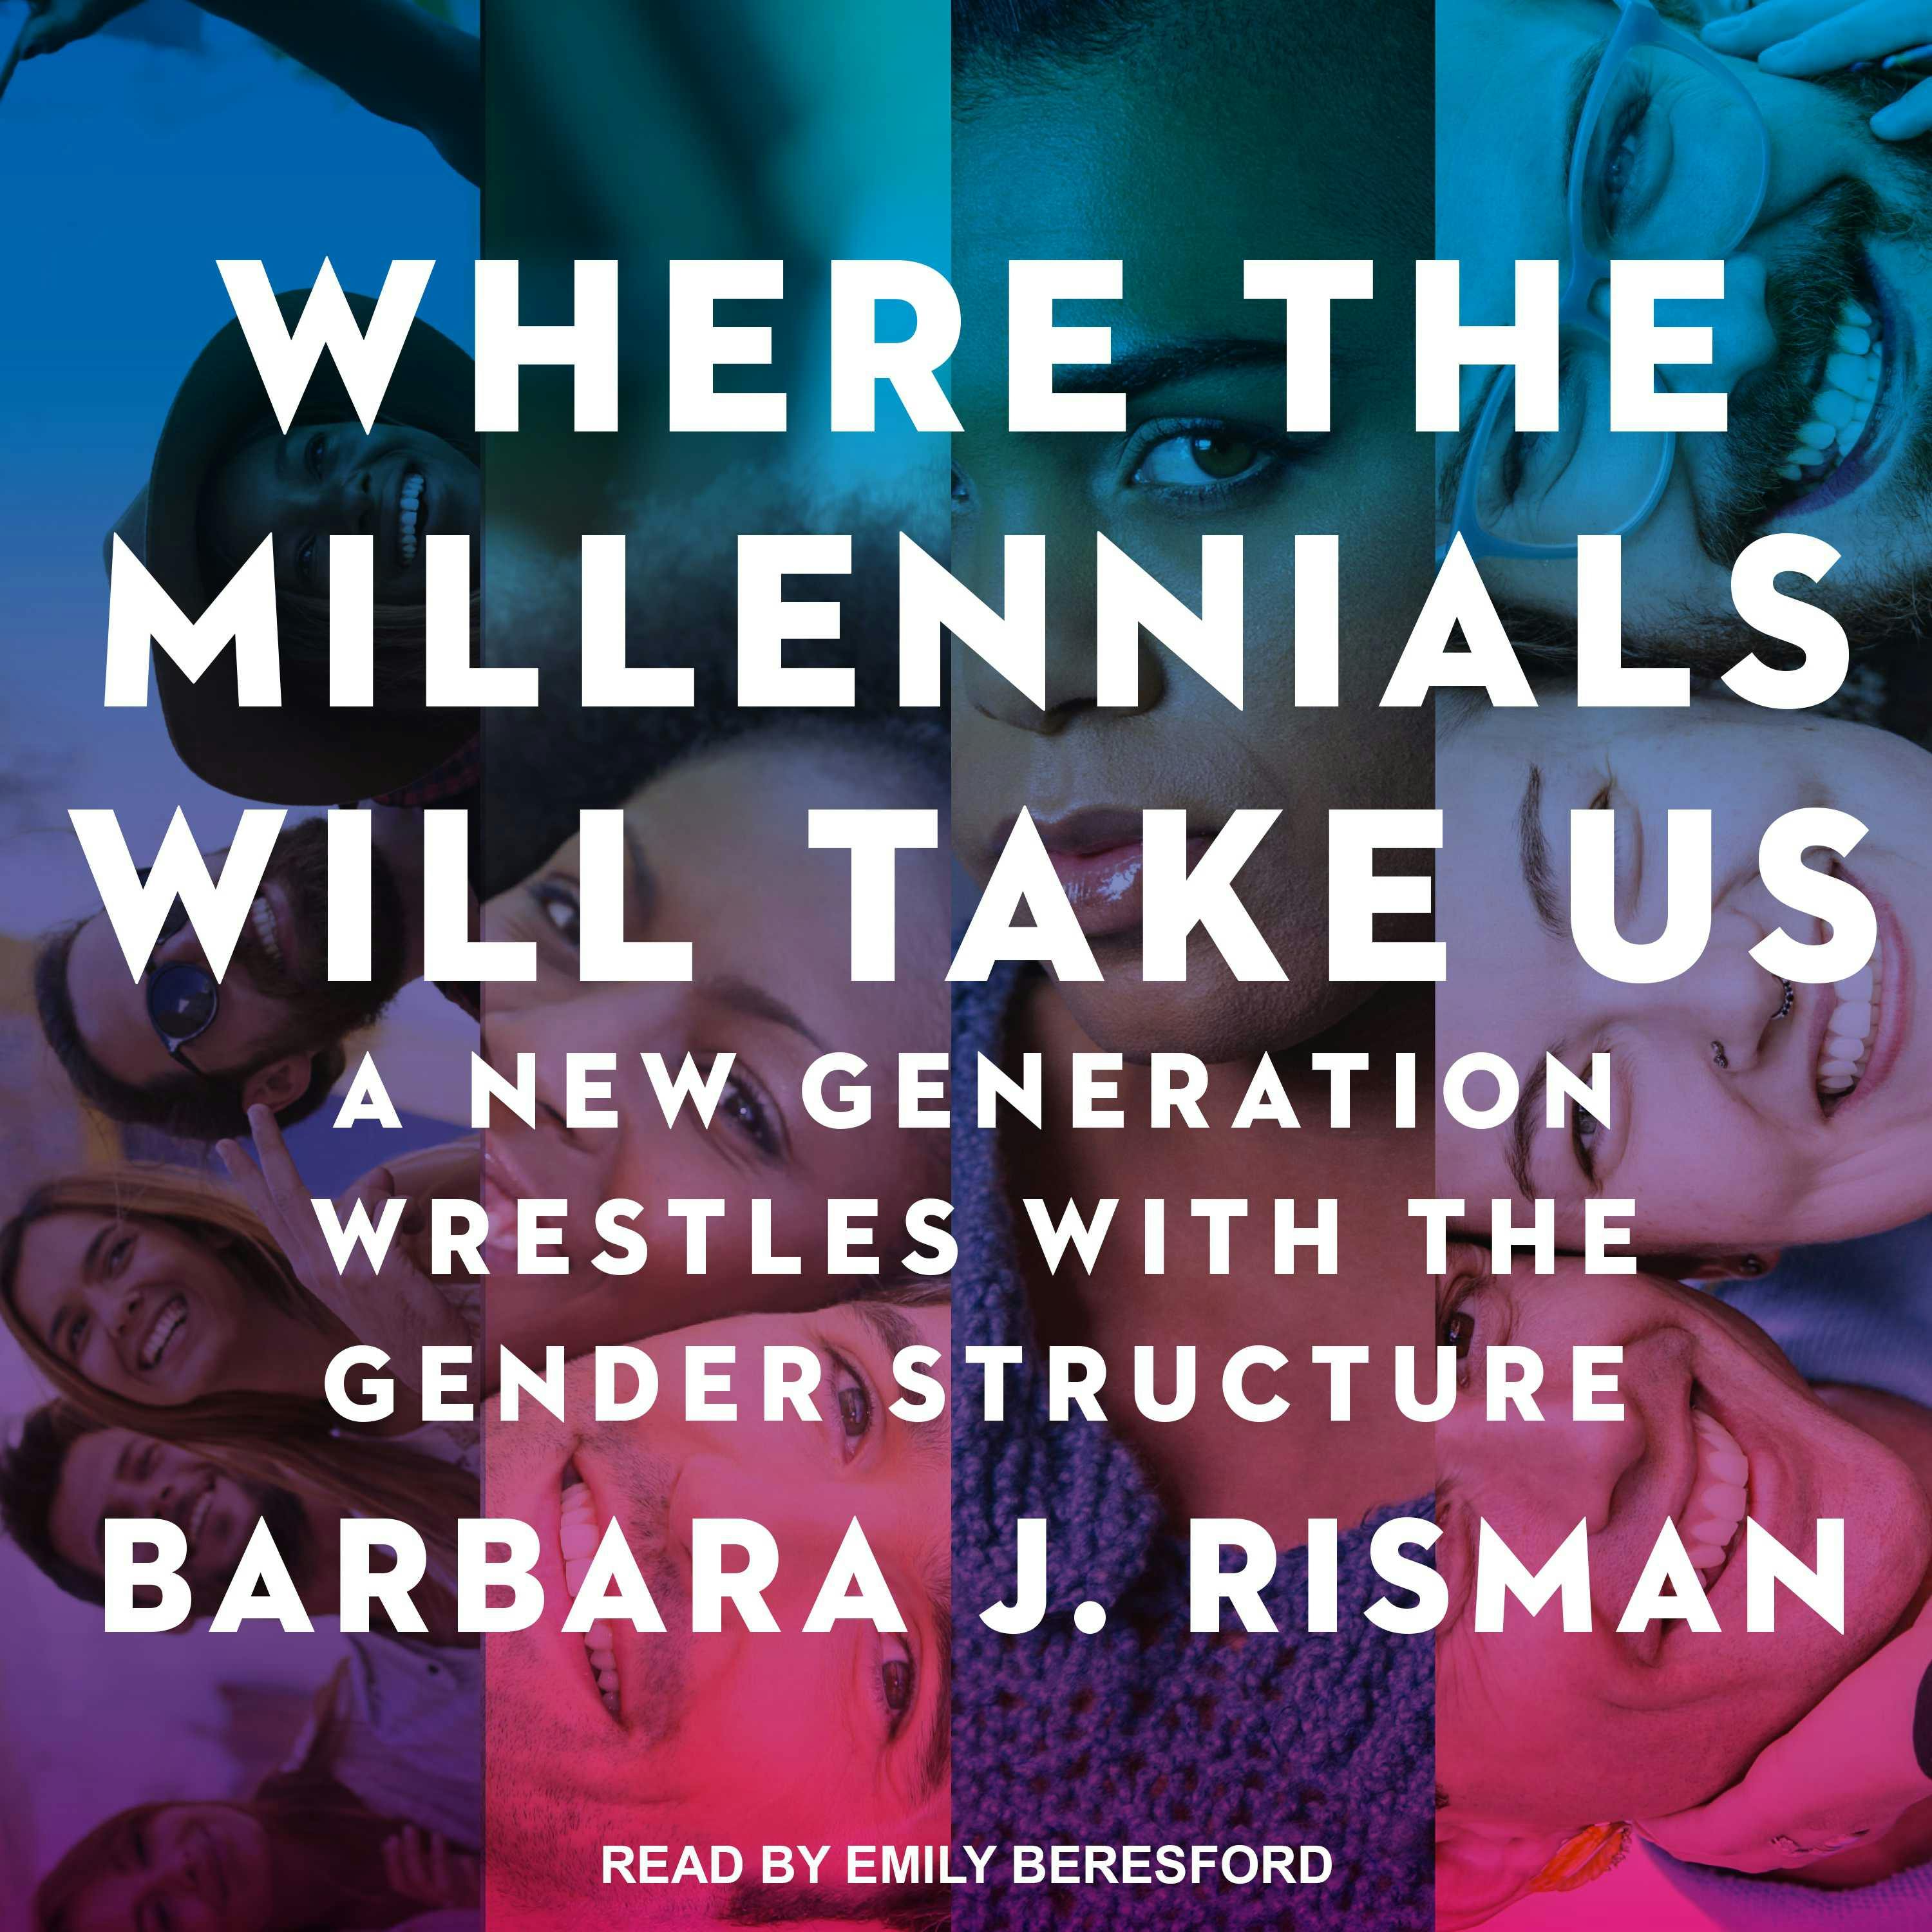 Where the Millennials Will Take Us: A New Generation Wrestles with the Gender Structure - Barbara J. Risman